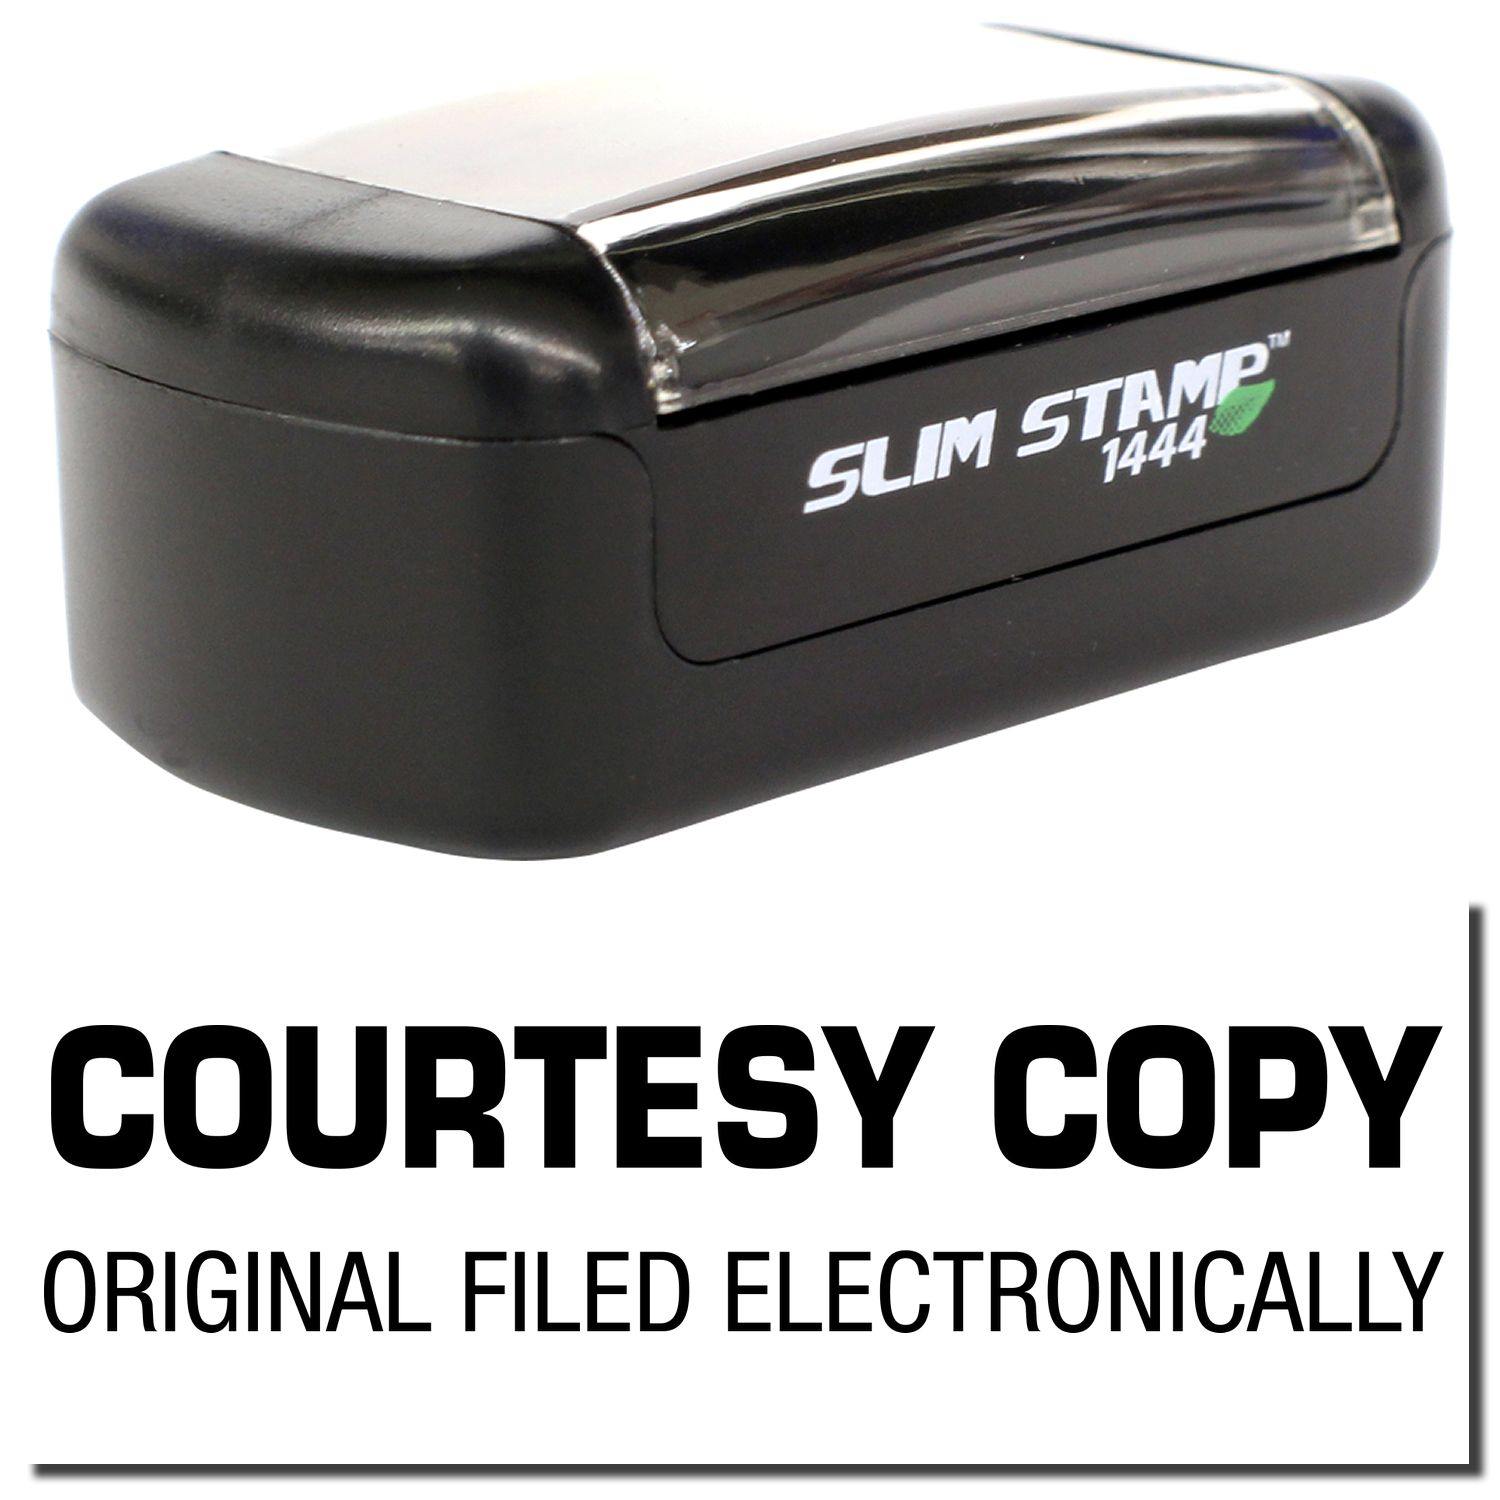 A stock office pre-inked stamp with a stamped image showing how the text "COURTESY COPY ORIGINAL FILED ELECTRONICALLY" is displayed after stamping.